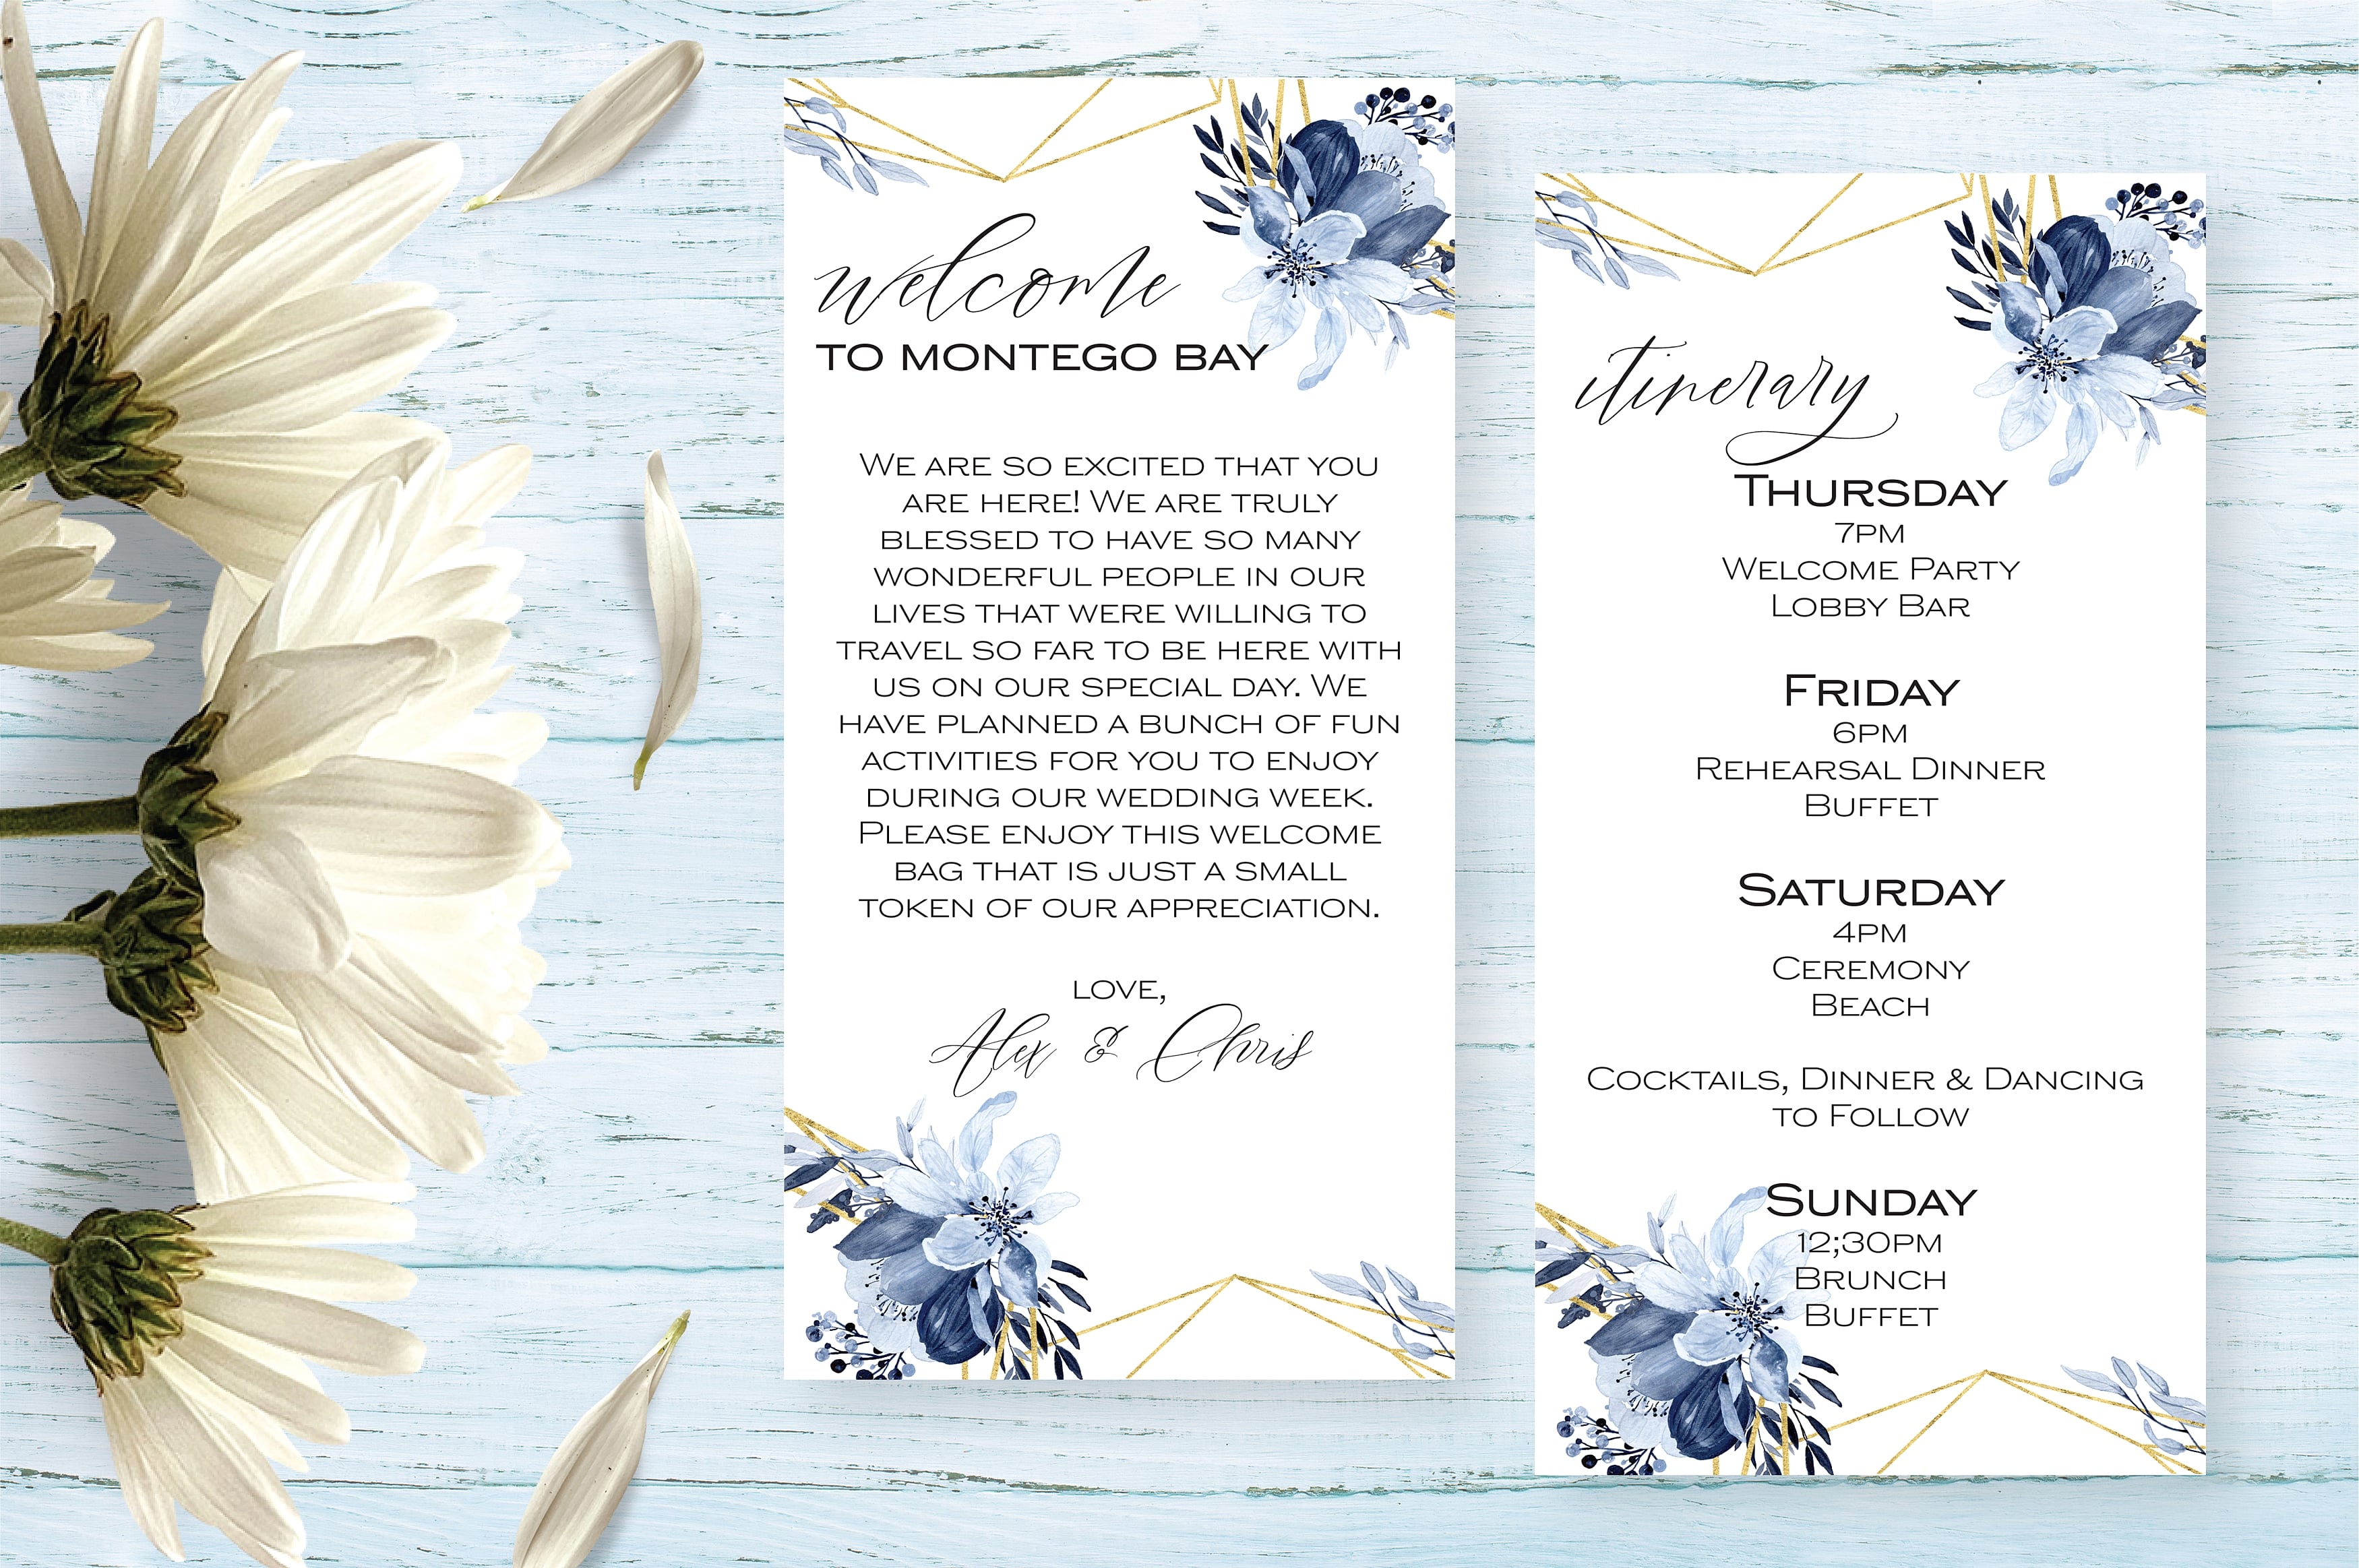 Destination wedding welcome letter and itinerary cards in dusty blue